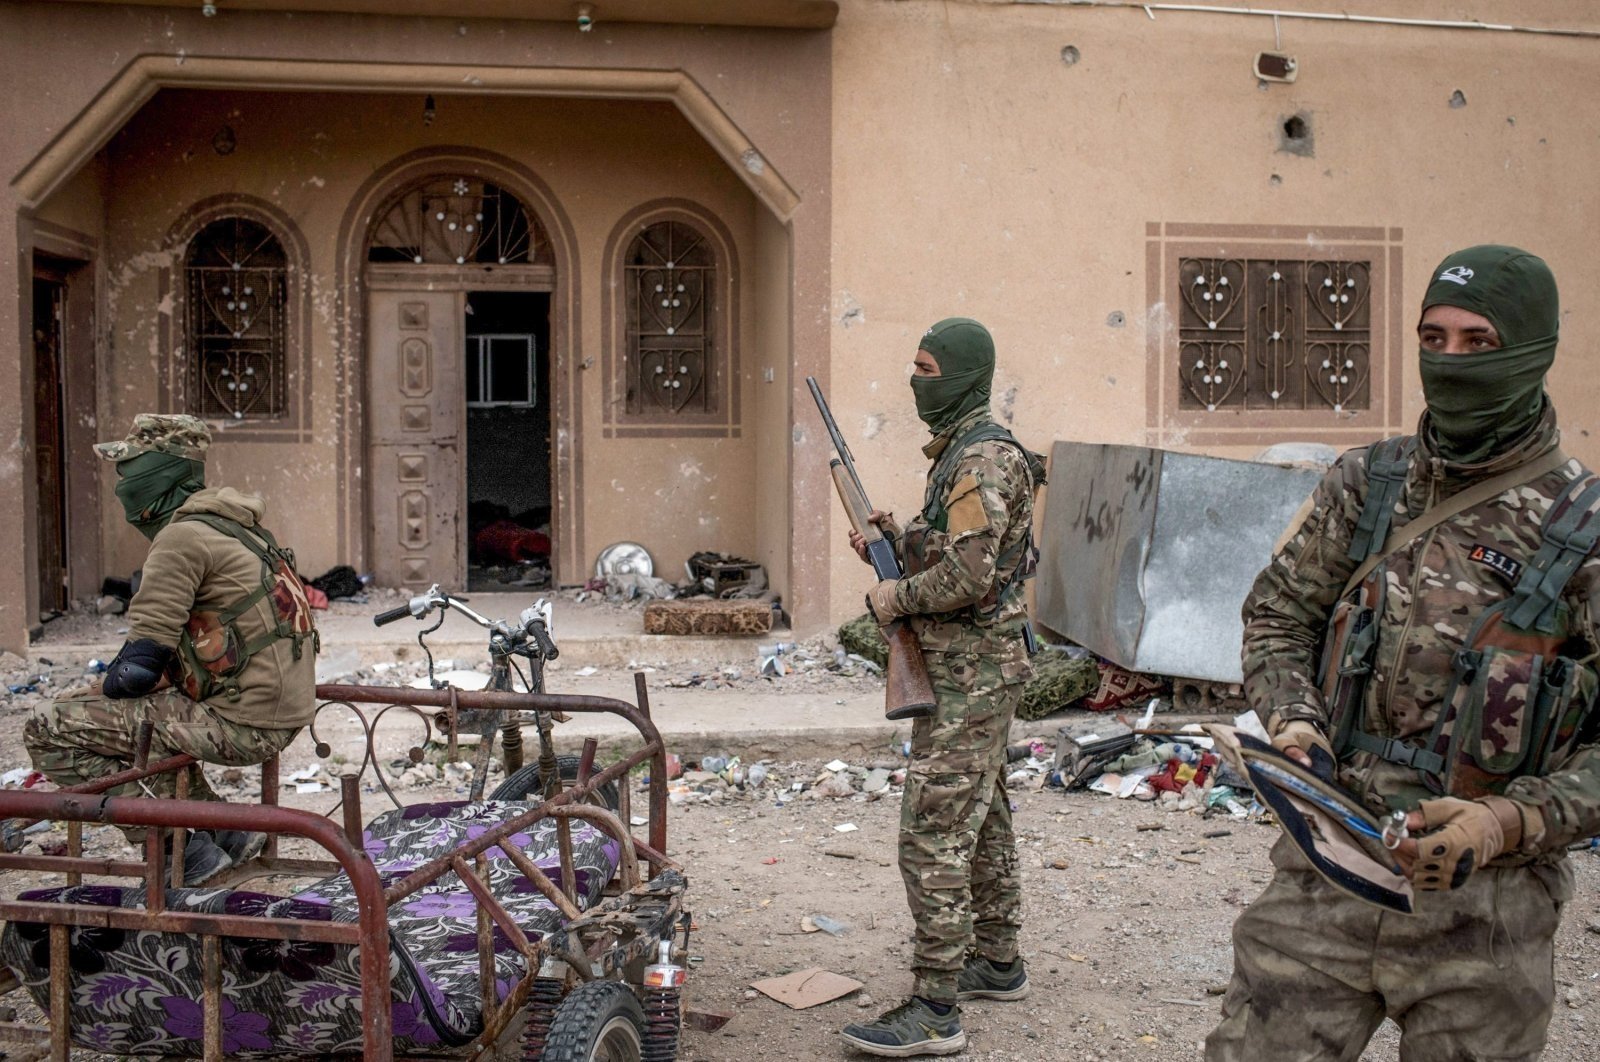 YPG/PKK terrorists are seen in front of a building in Baghouz, Syria, March 24, 2019. (Getty Images, File Photo)